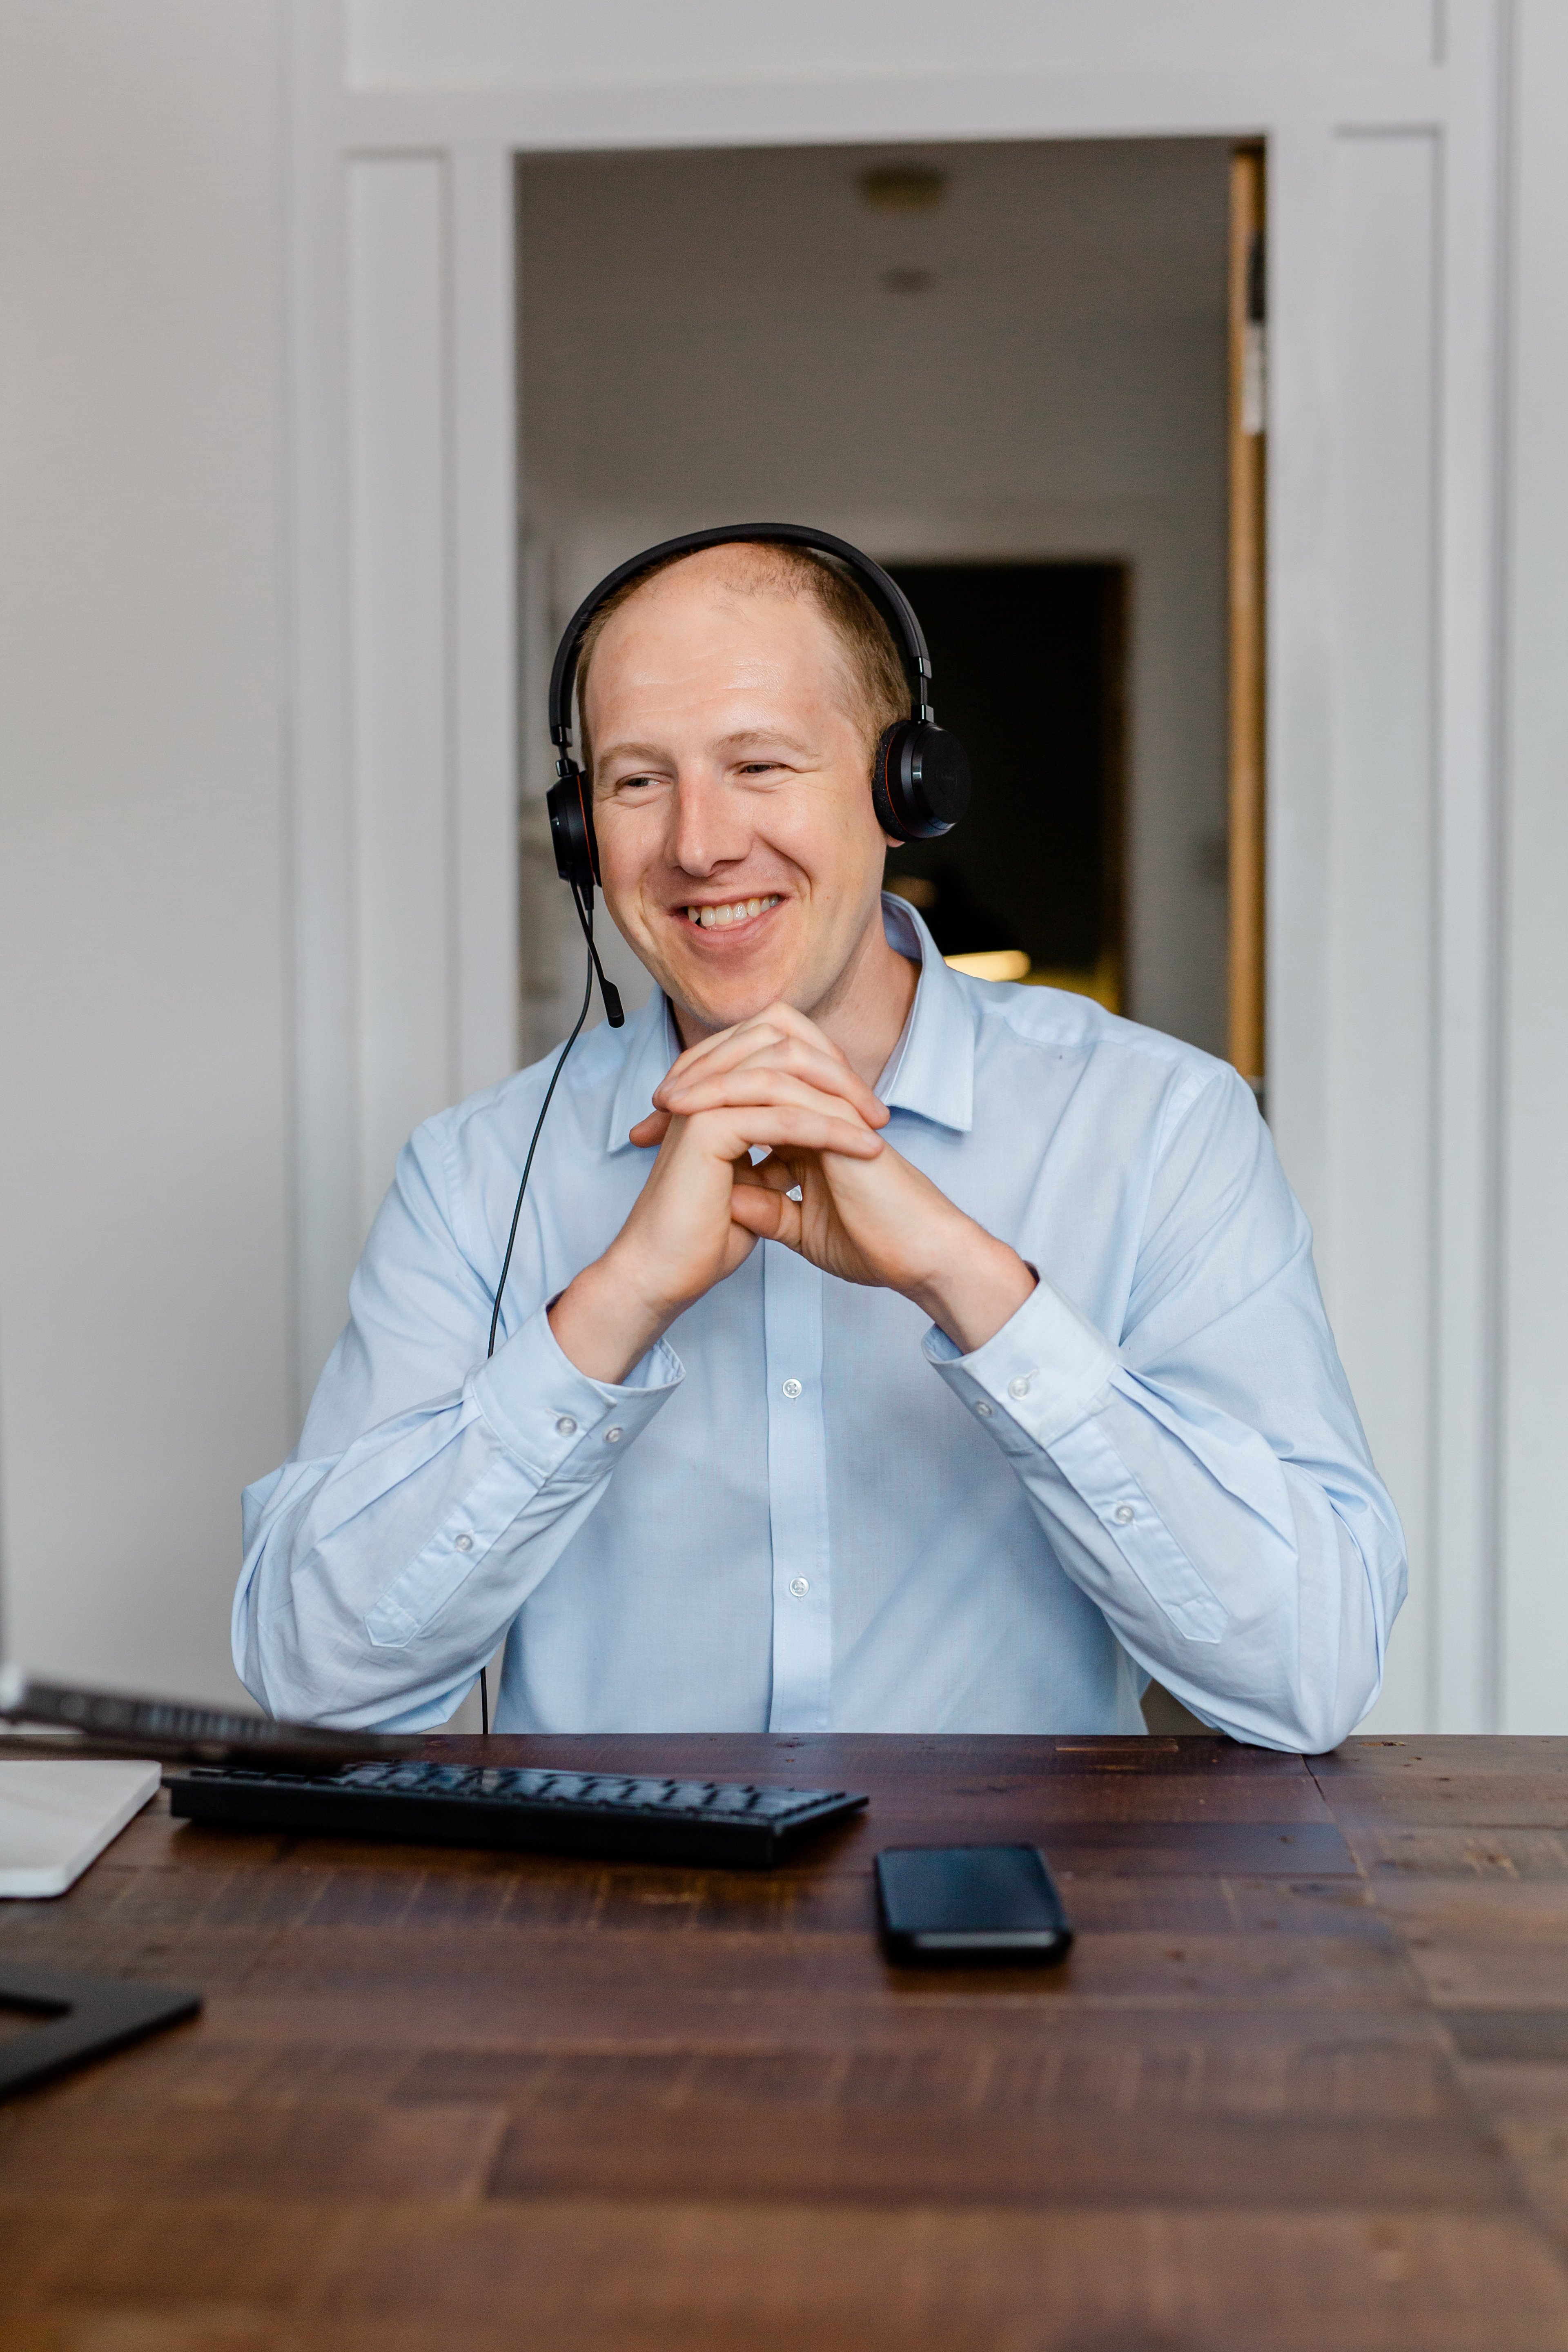 Datel's John Hesketh wearing a blue shirt and wireless headset, speaking to a customer from his home office